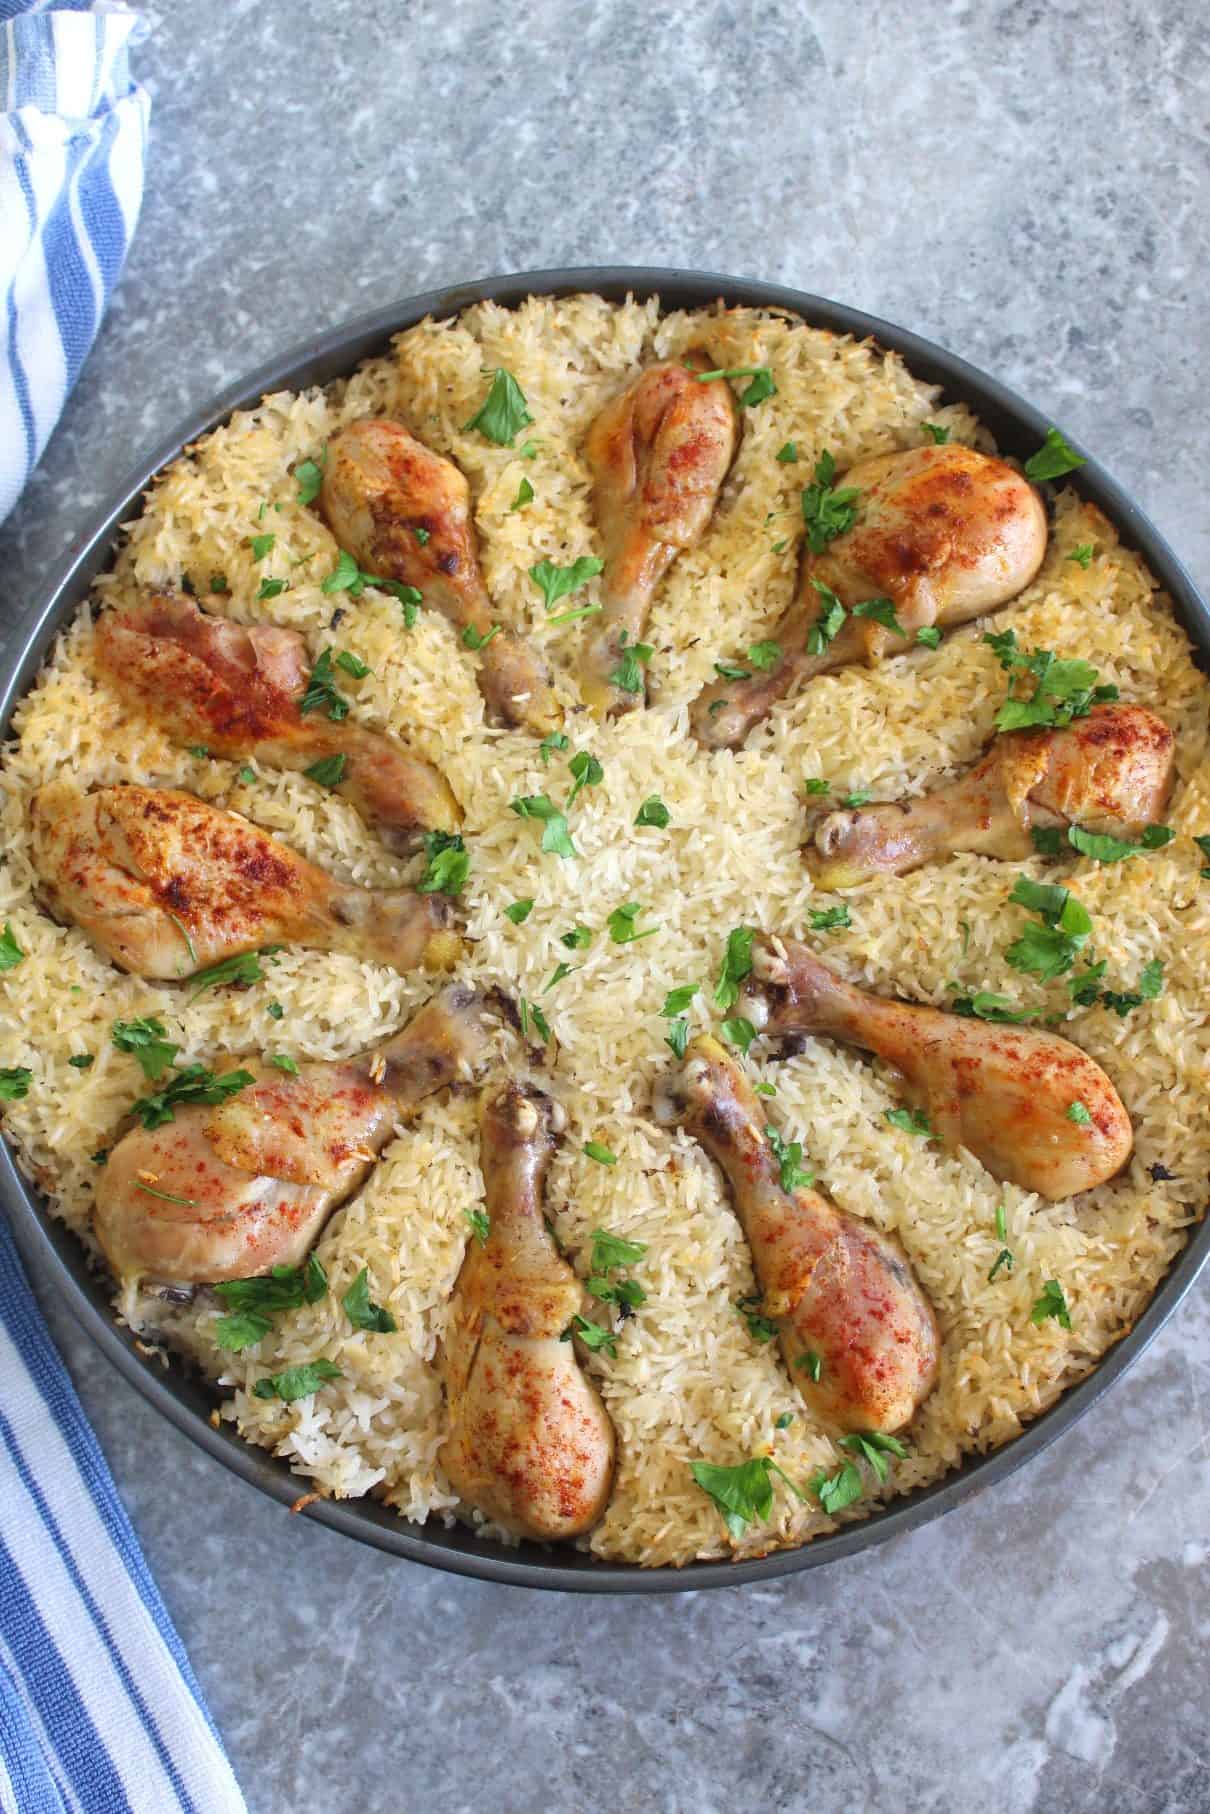 Picture shows a round pot, just baked with a rice dish and chicken drumsticks.